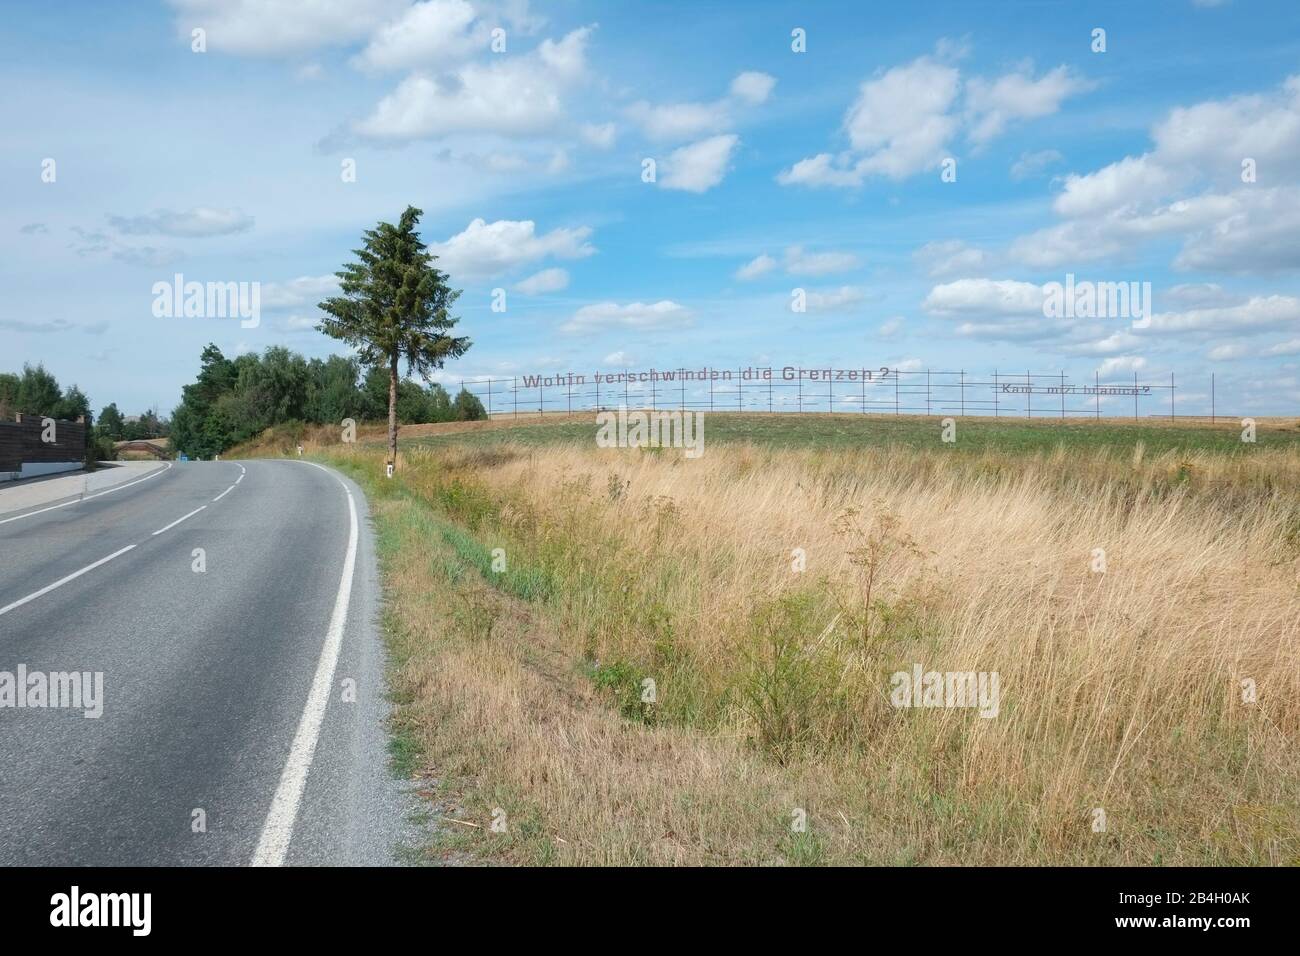 Large sign in German is placed on near the border of Czech Republic and Austria Stock Photo